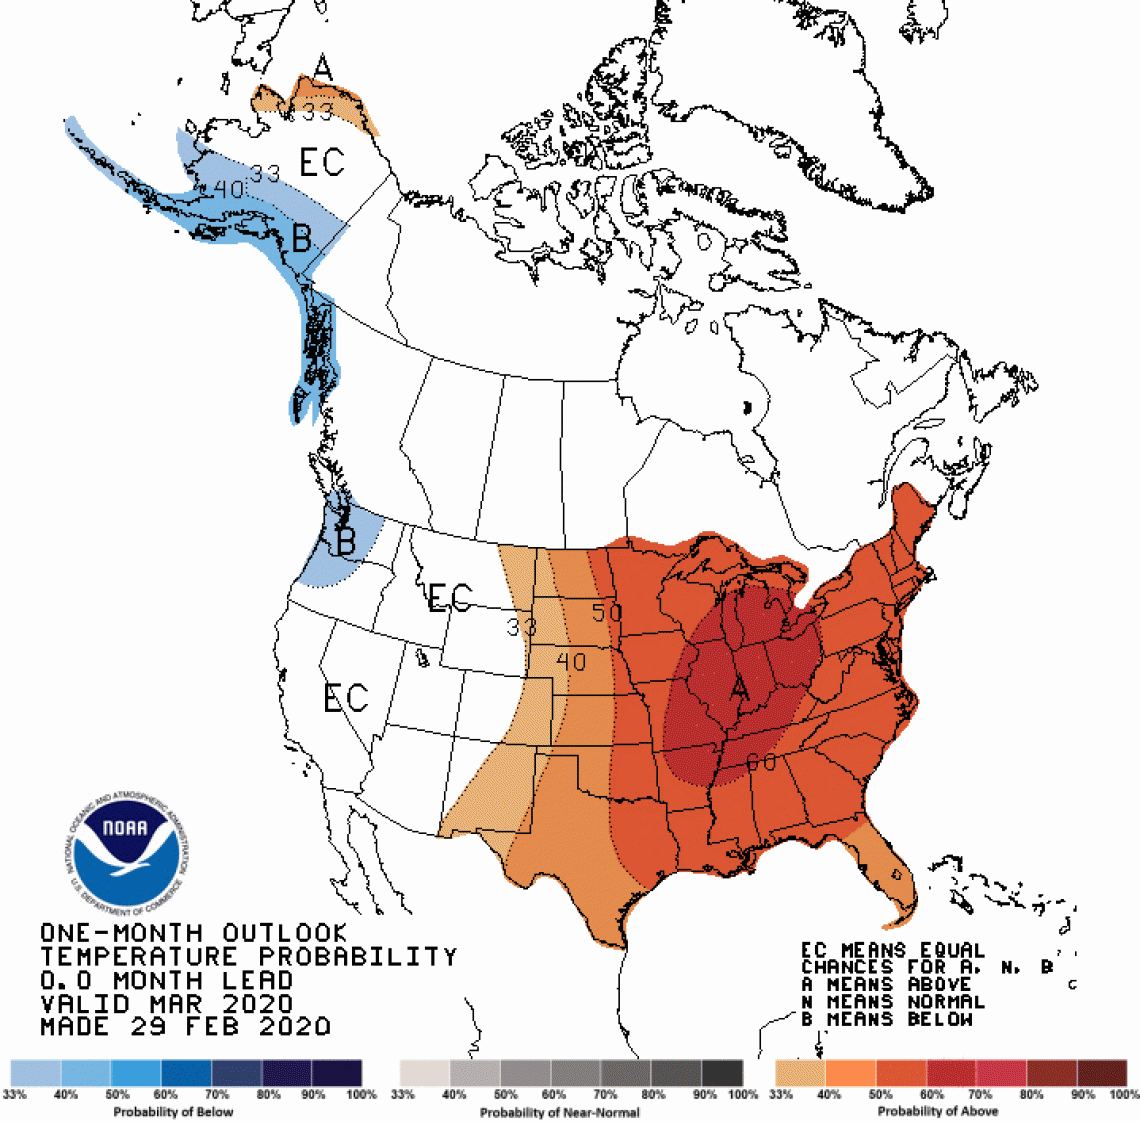 2020 March temperature outlook map